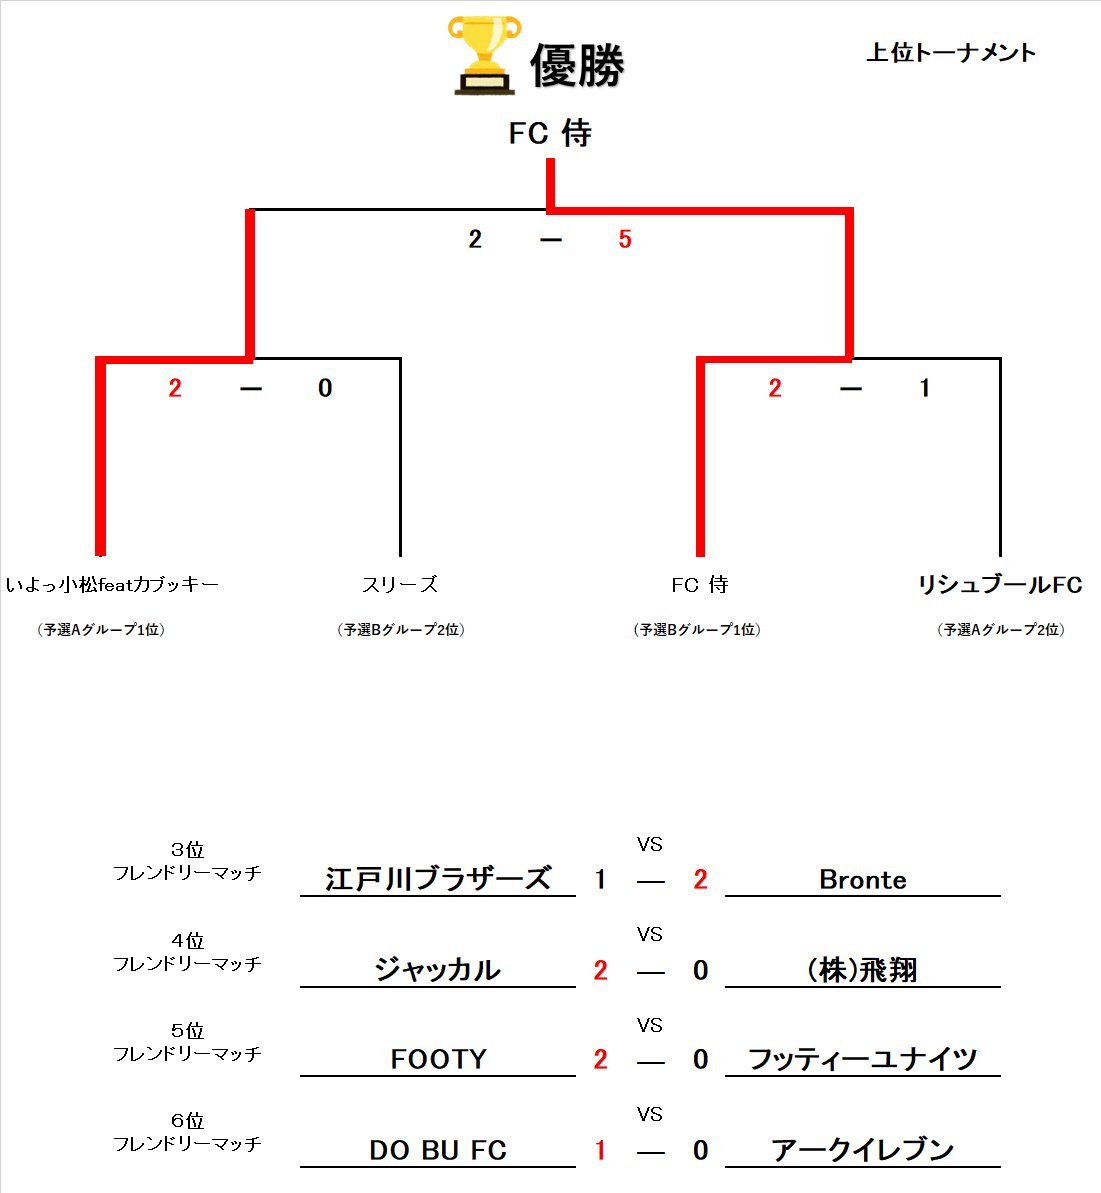 NEW STAGE CUP  UBクラス